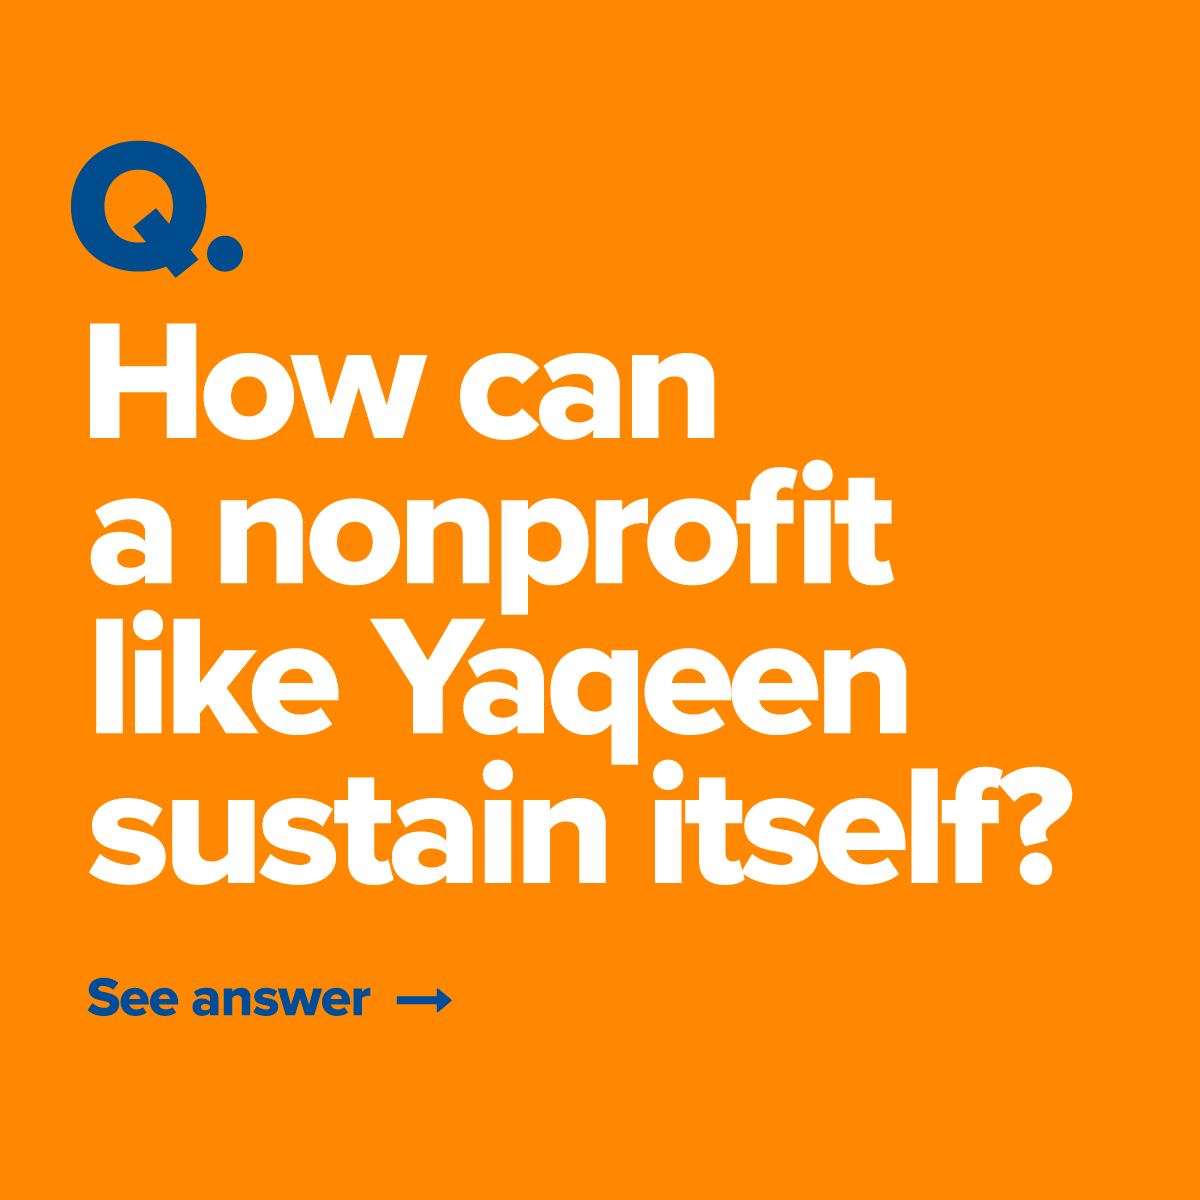 Question 5: How can a nonprofit like Yaqeen sustain itself?